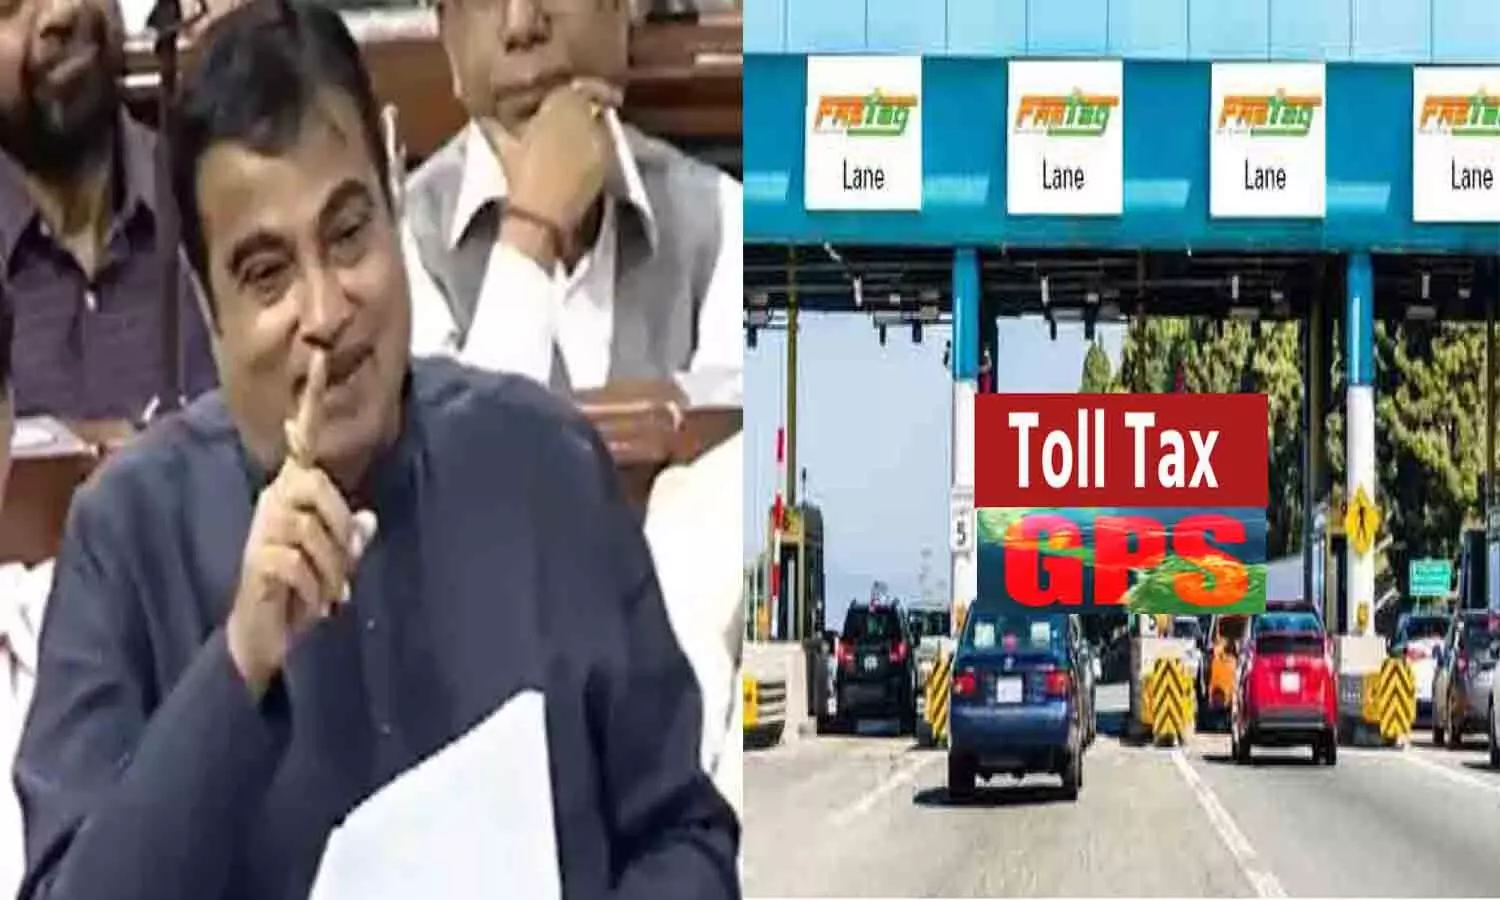 Toll Collection: Toll tax will be deducted from GPS, Nitin Gadkari said – Toll blocks will be removed